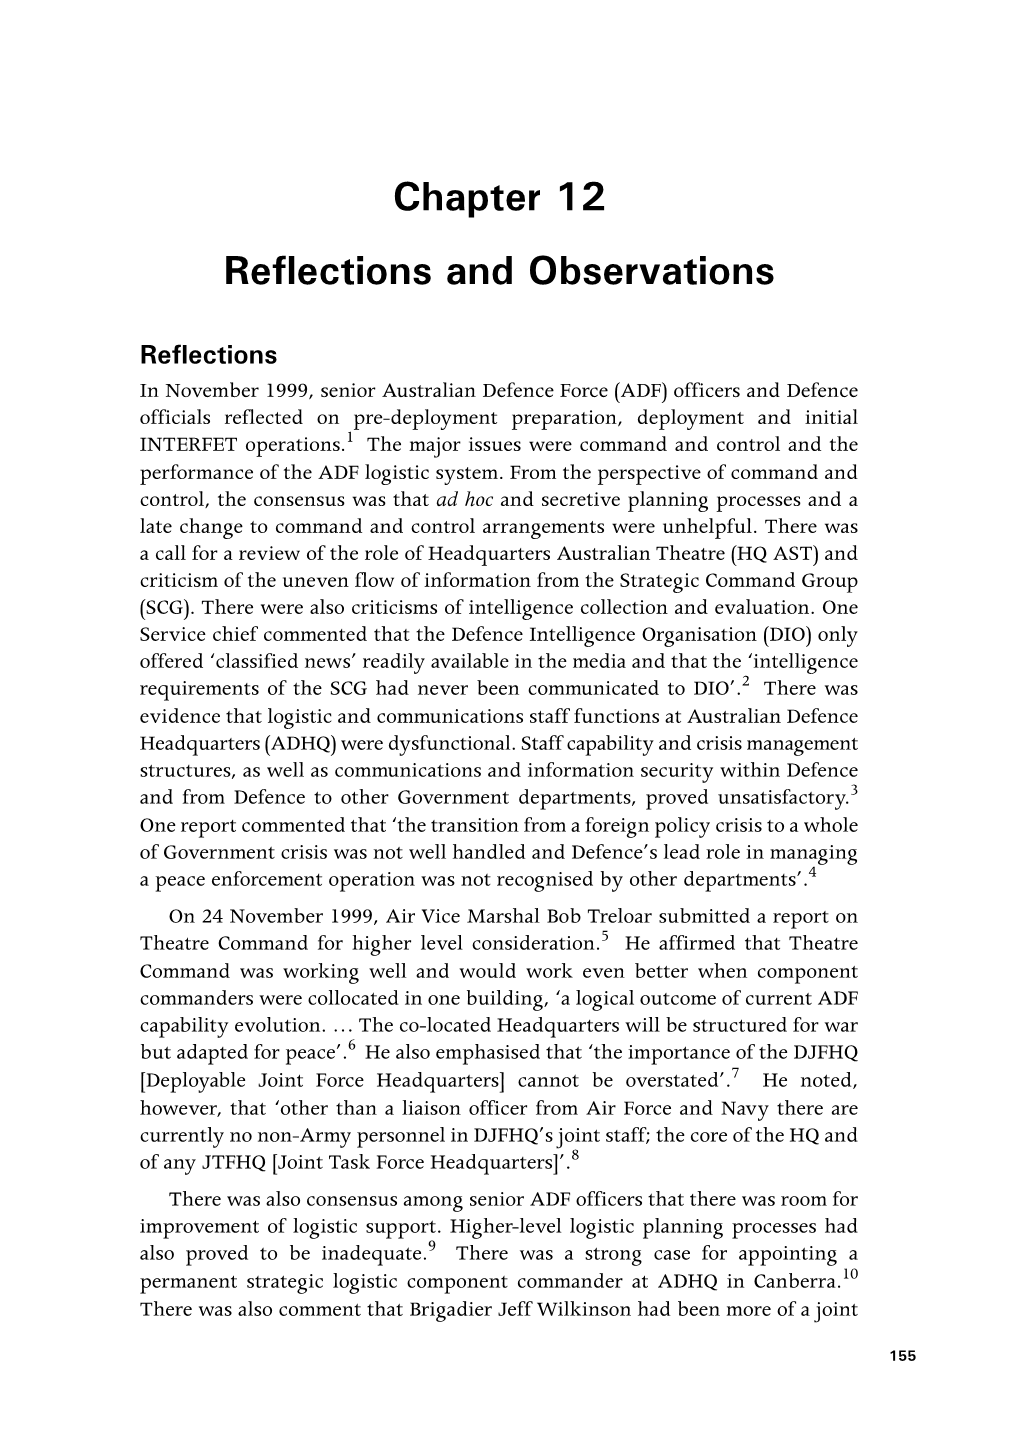 Reflections and Observations